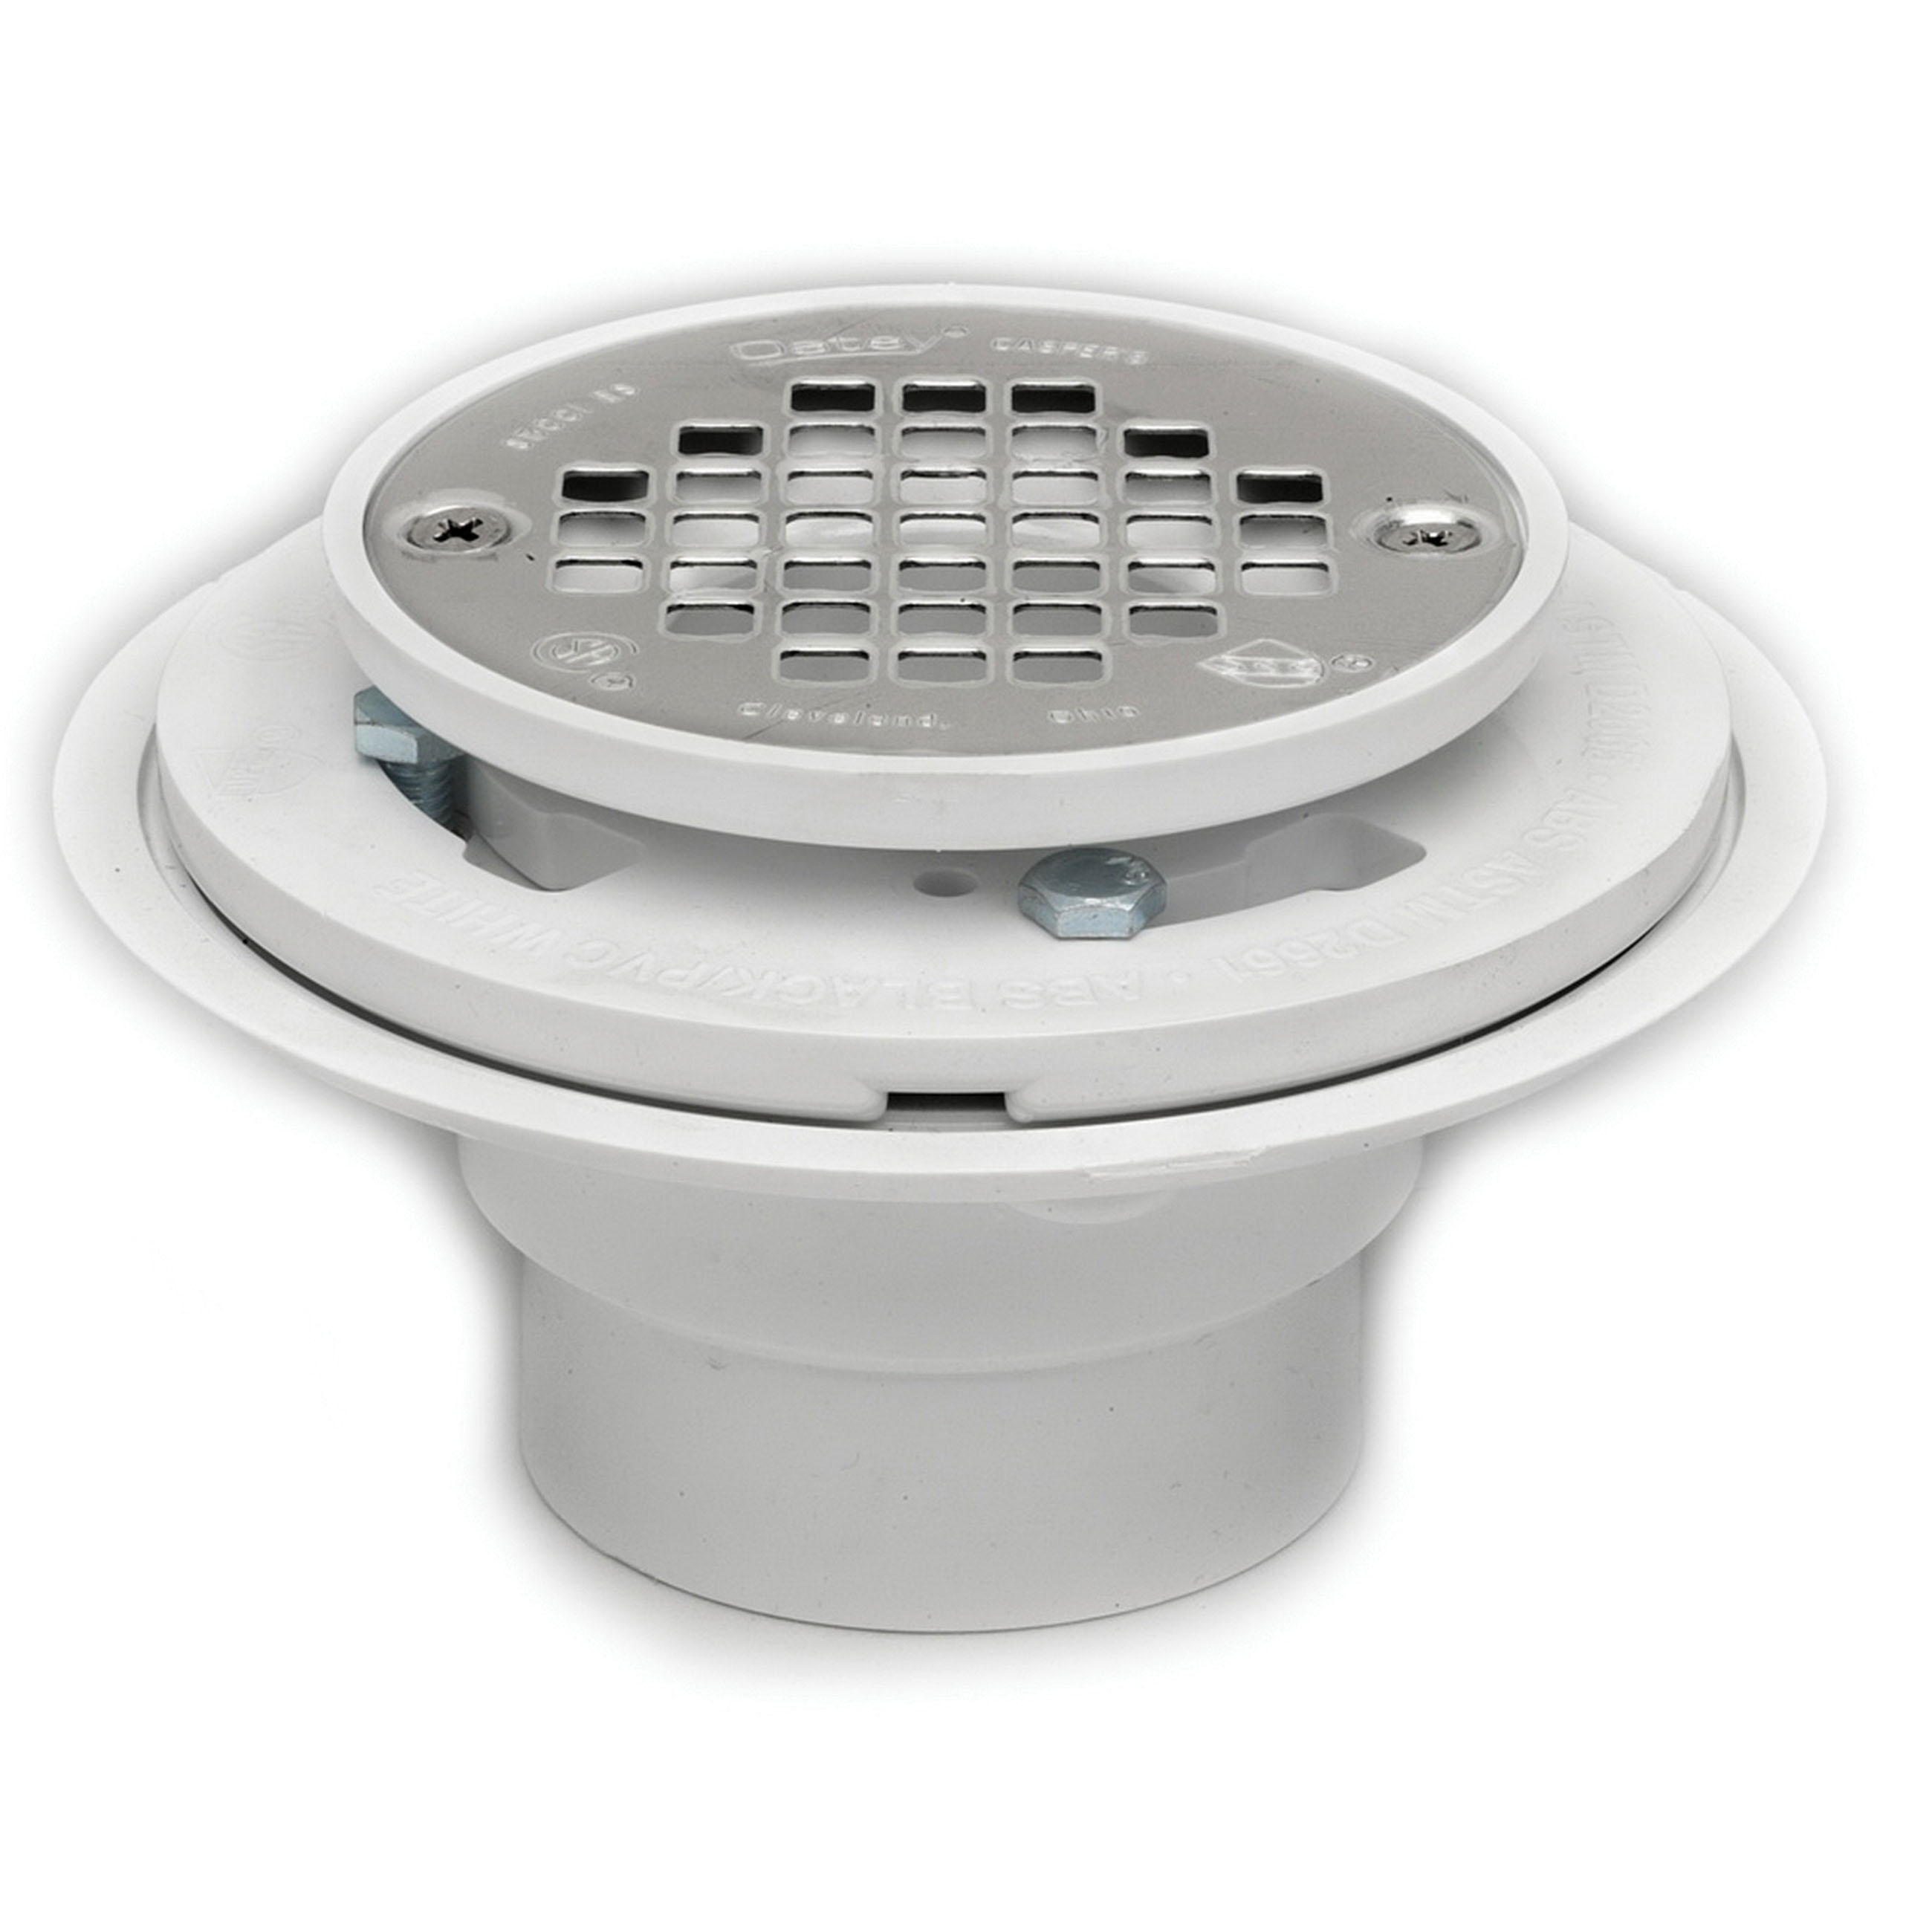 Oatey® 42213 Plastic/Stainless Steel White SCH 40 Shower Drain with Strainer, 2 - 3 in, Threaded